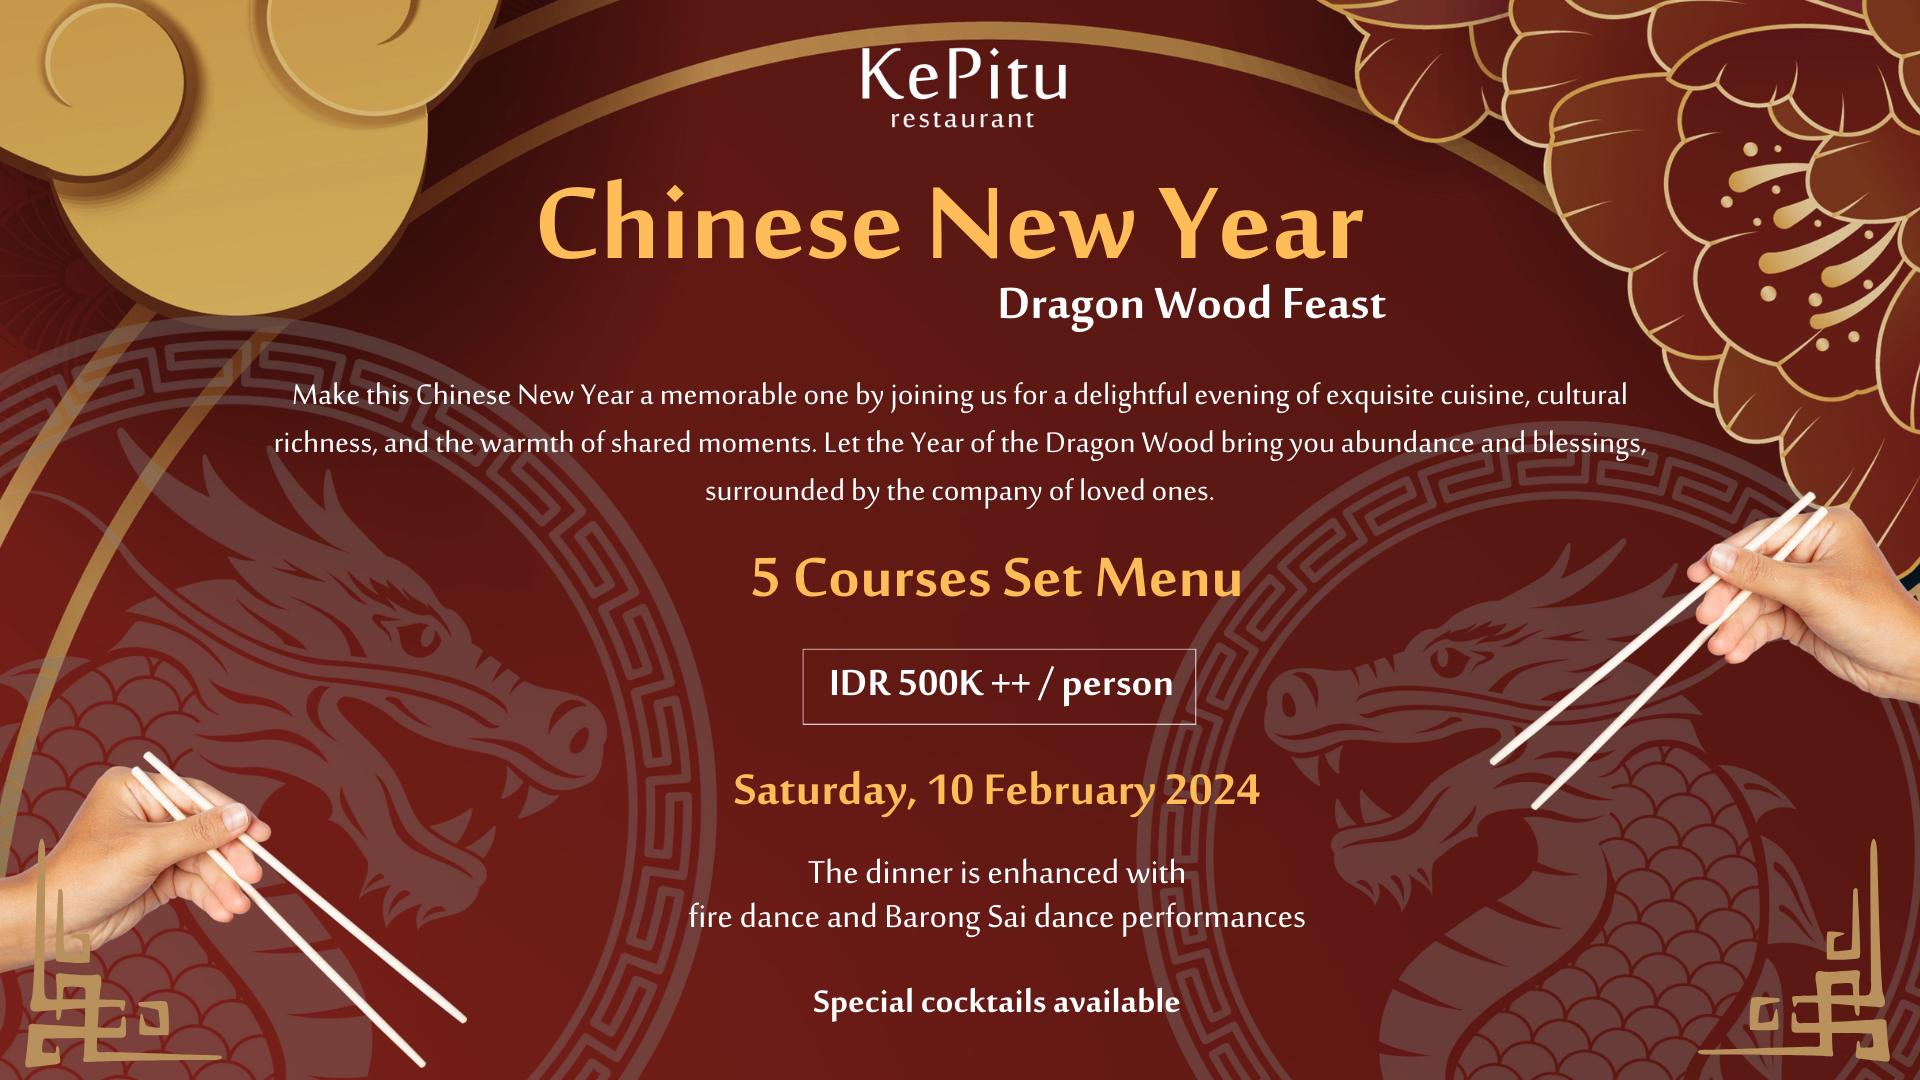 Drink Chinese New Year "Dragon Wood Feast" 17640